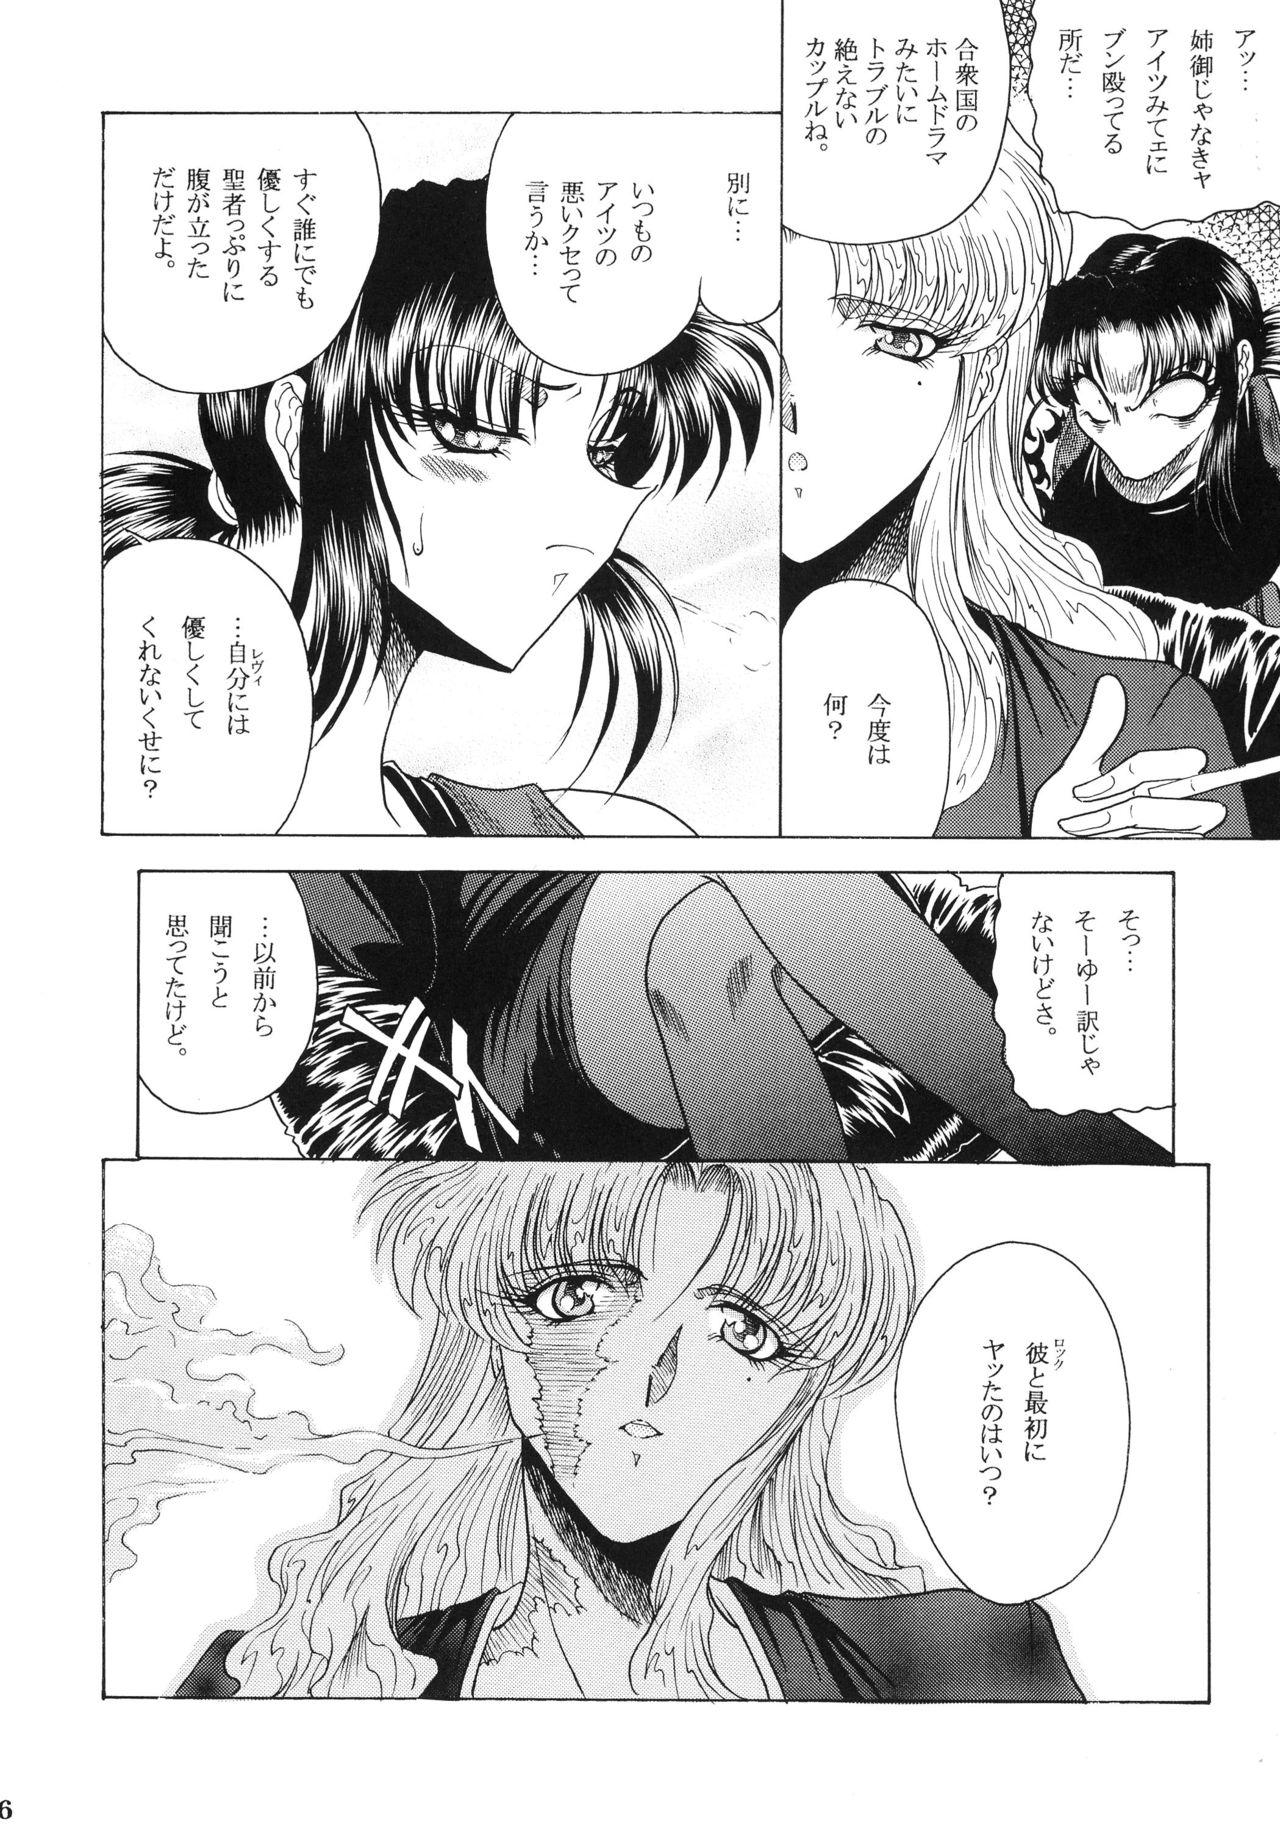 Swallow ZONE 38 China Syndrome - Black lagoon Chaturbate - Page 5